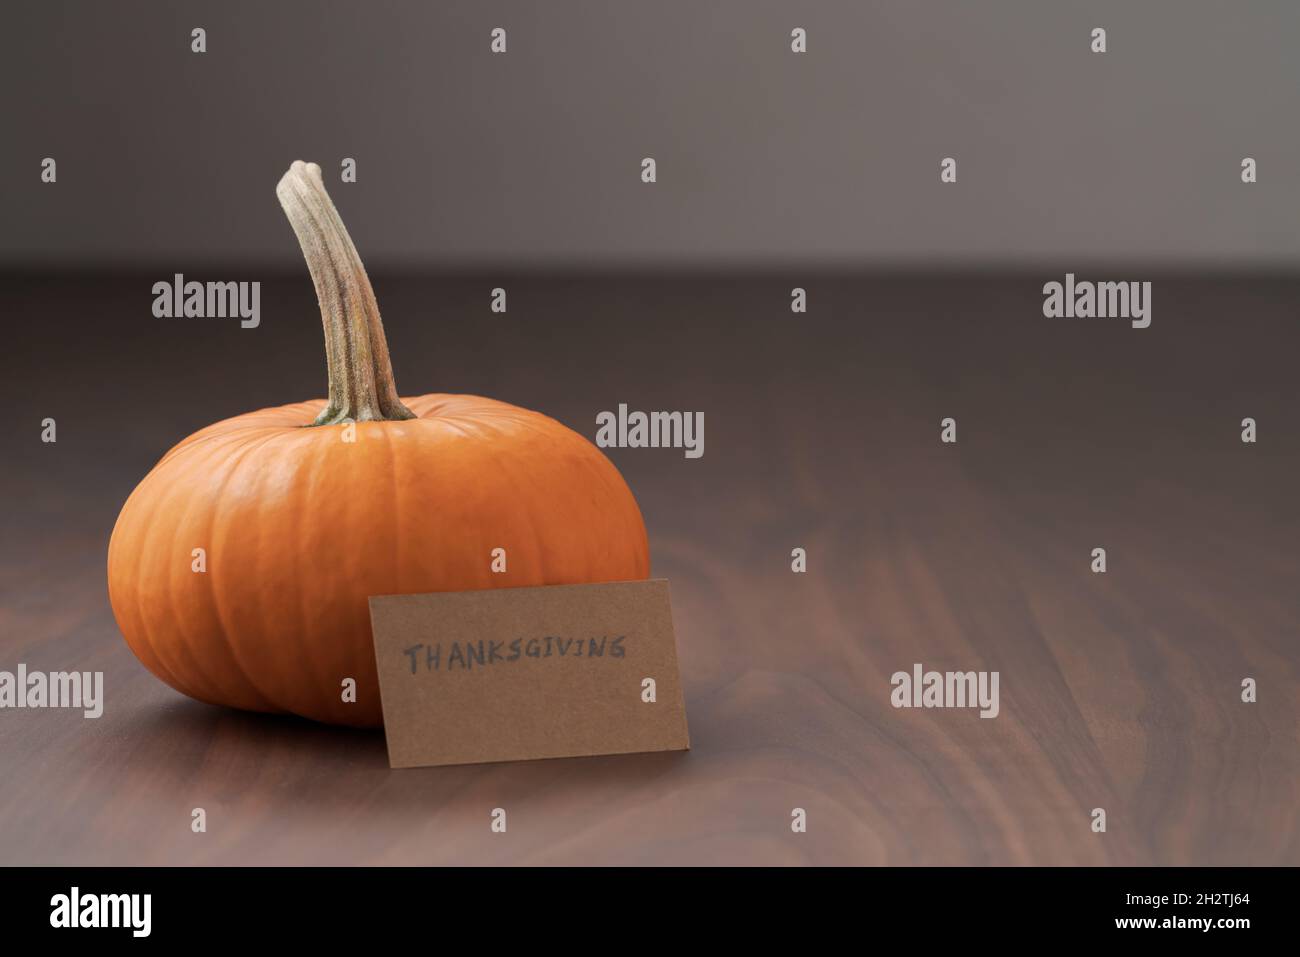 Small orange pumpkin on black walnut table with white wall background and thanksgiving card, shallow focus Stock Photo